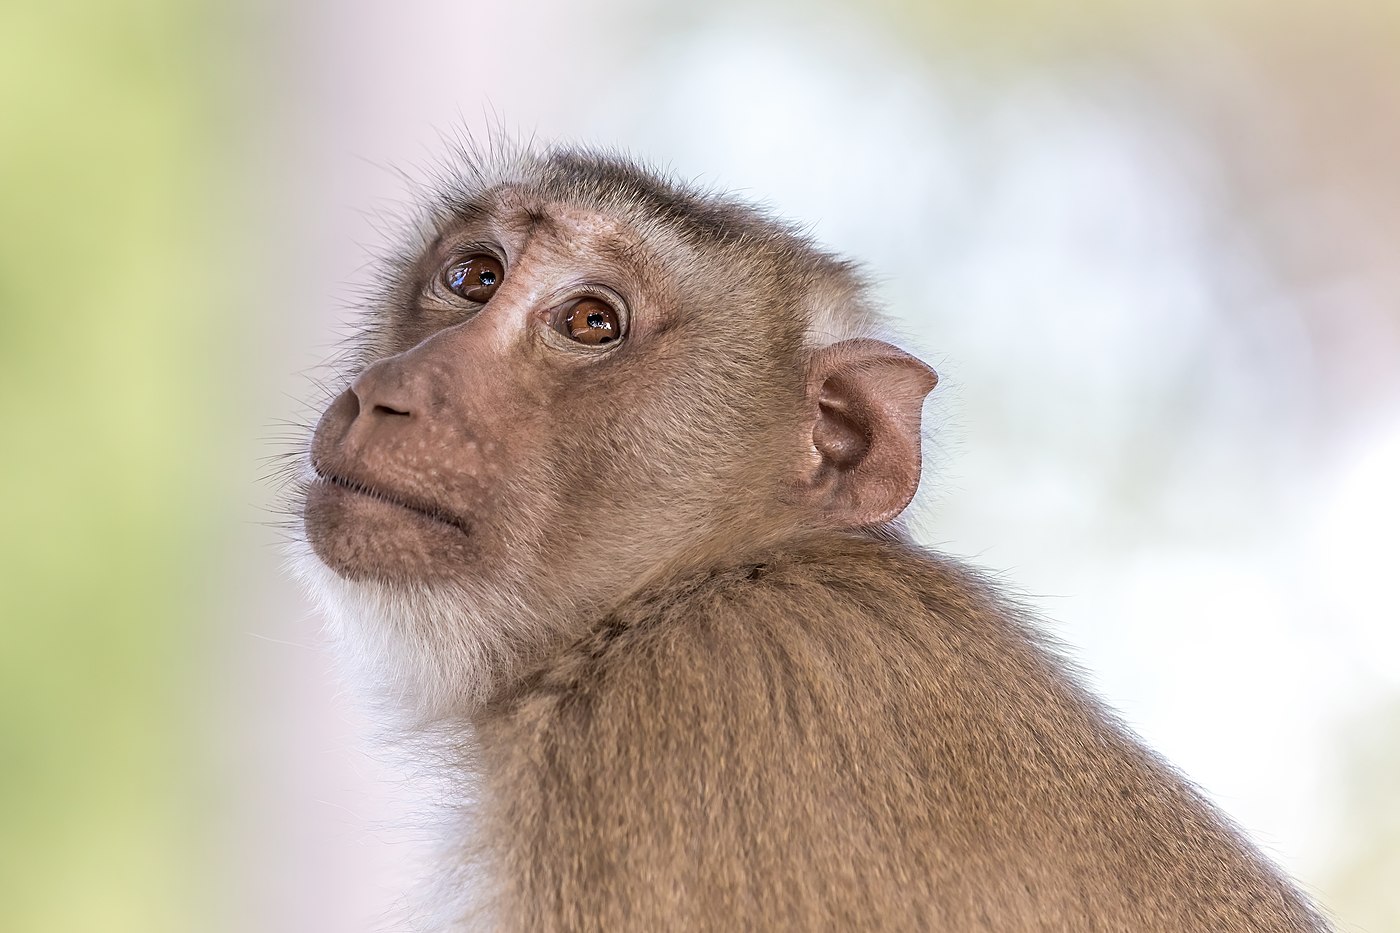 Macaca fasciculari (crab-eating macaque) looking up to the sky with a dreamy facial expression